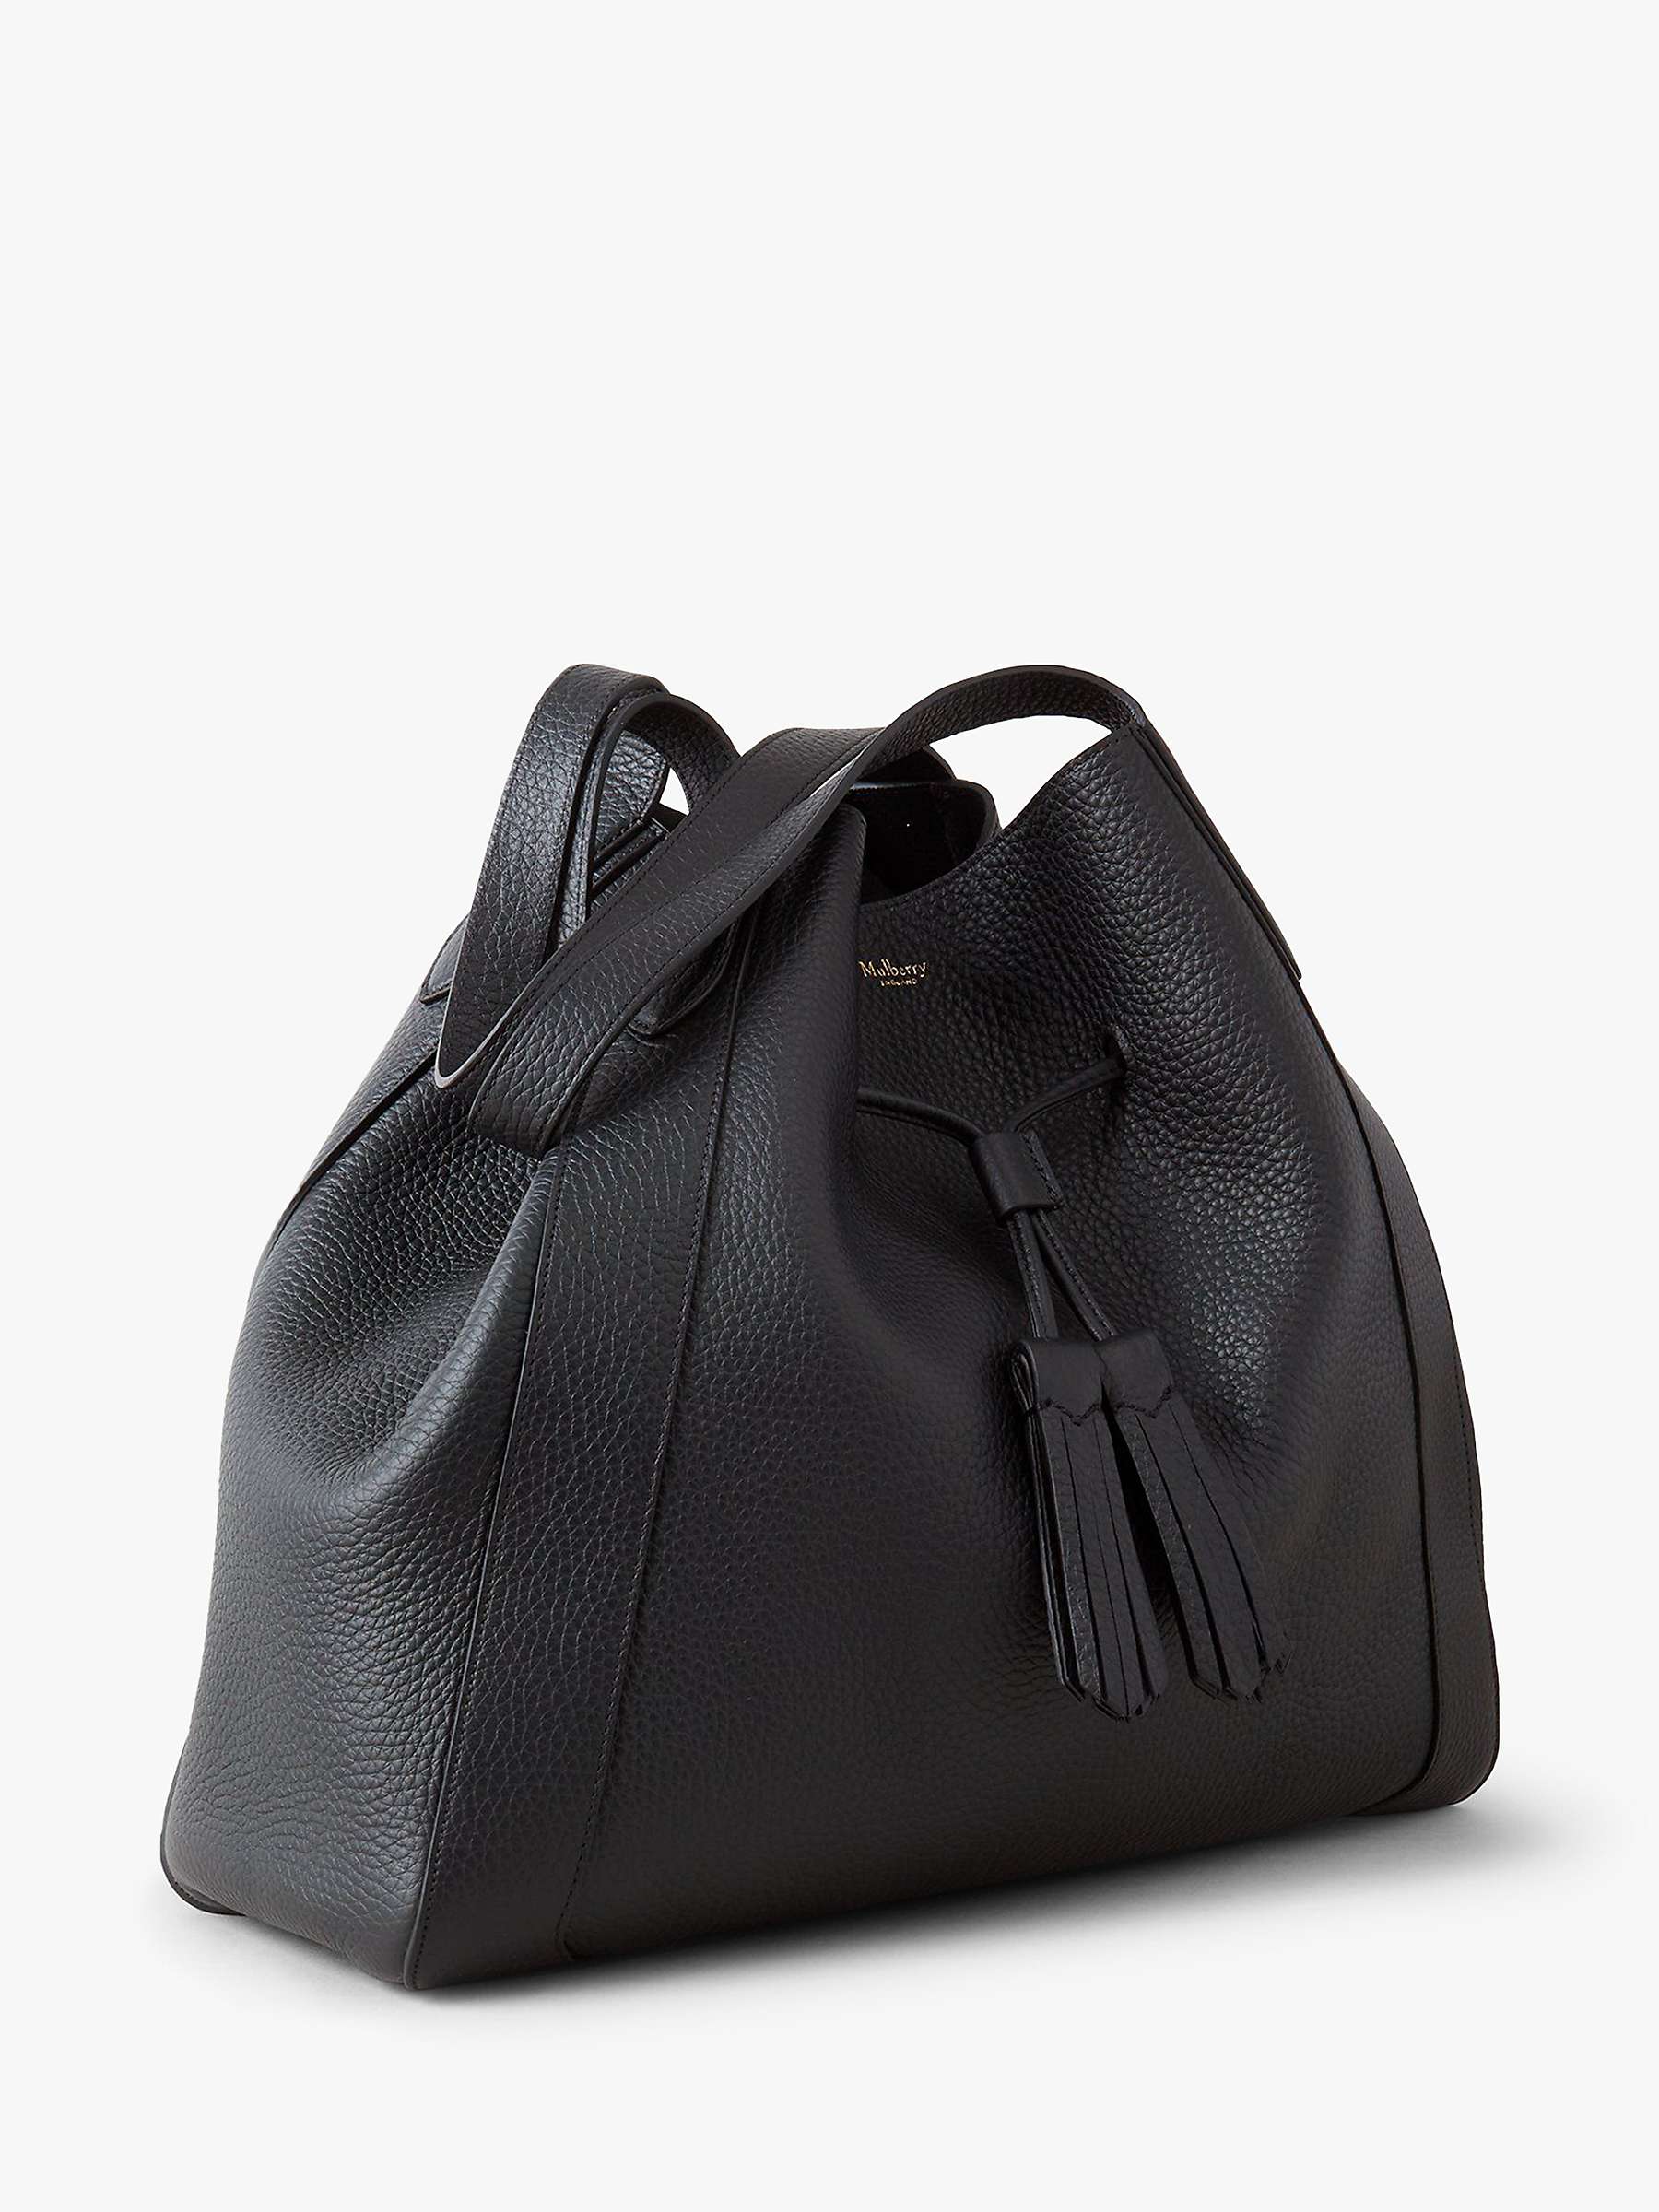 Buy Mulberry Millie Heavy Grain Leather Tote Bag Online at johnlewis.com